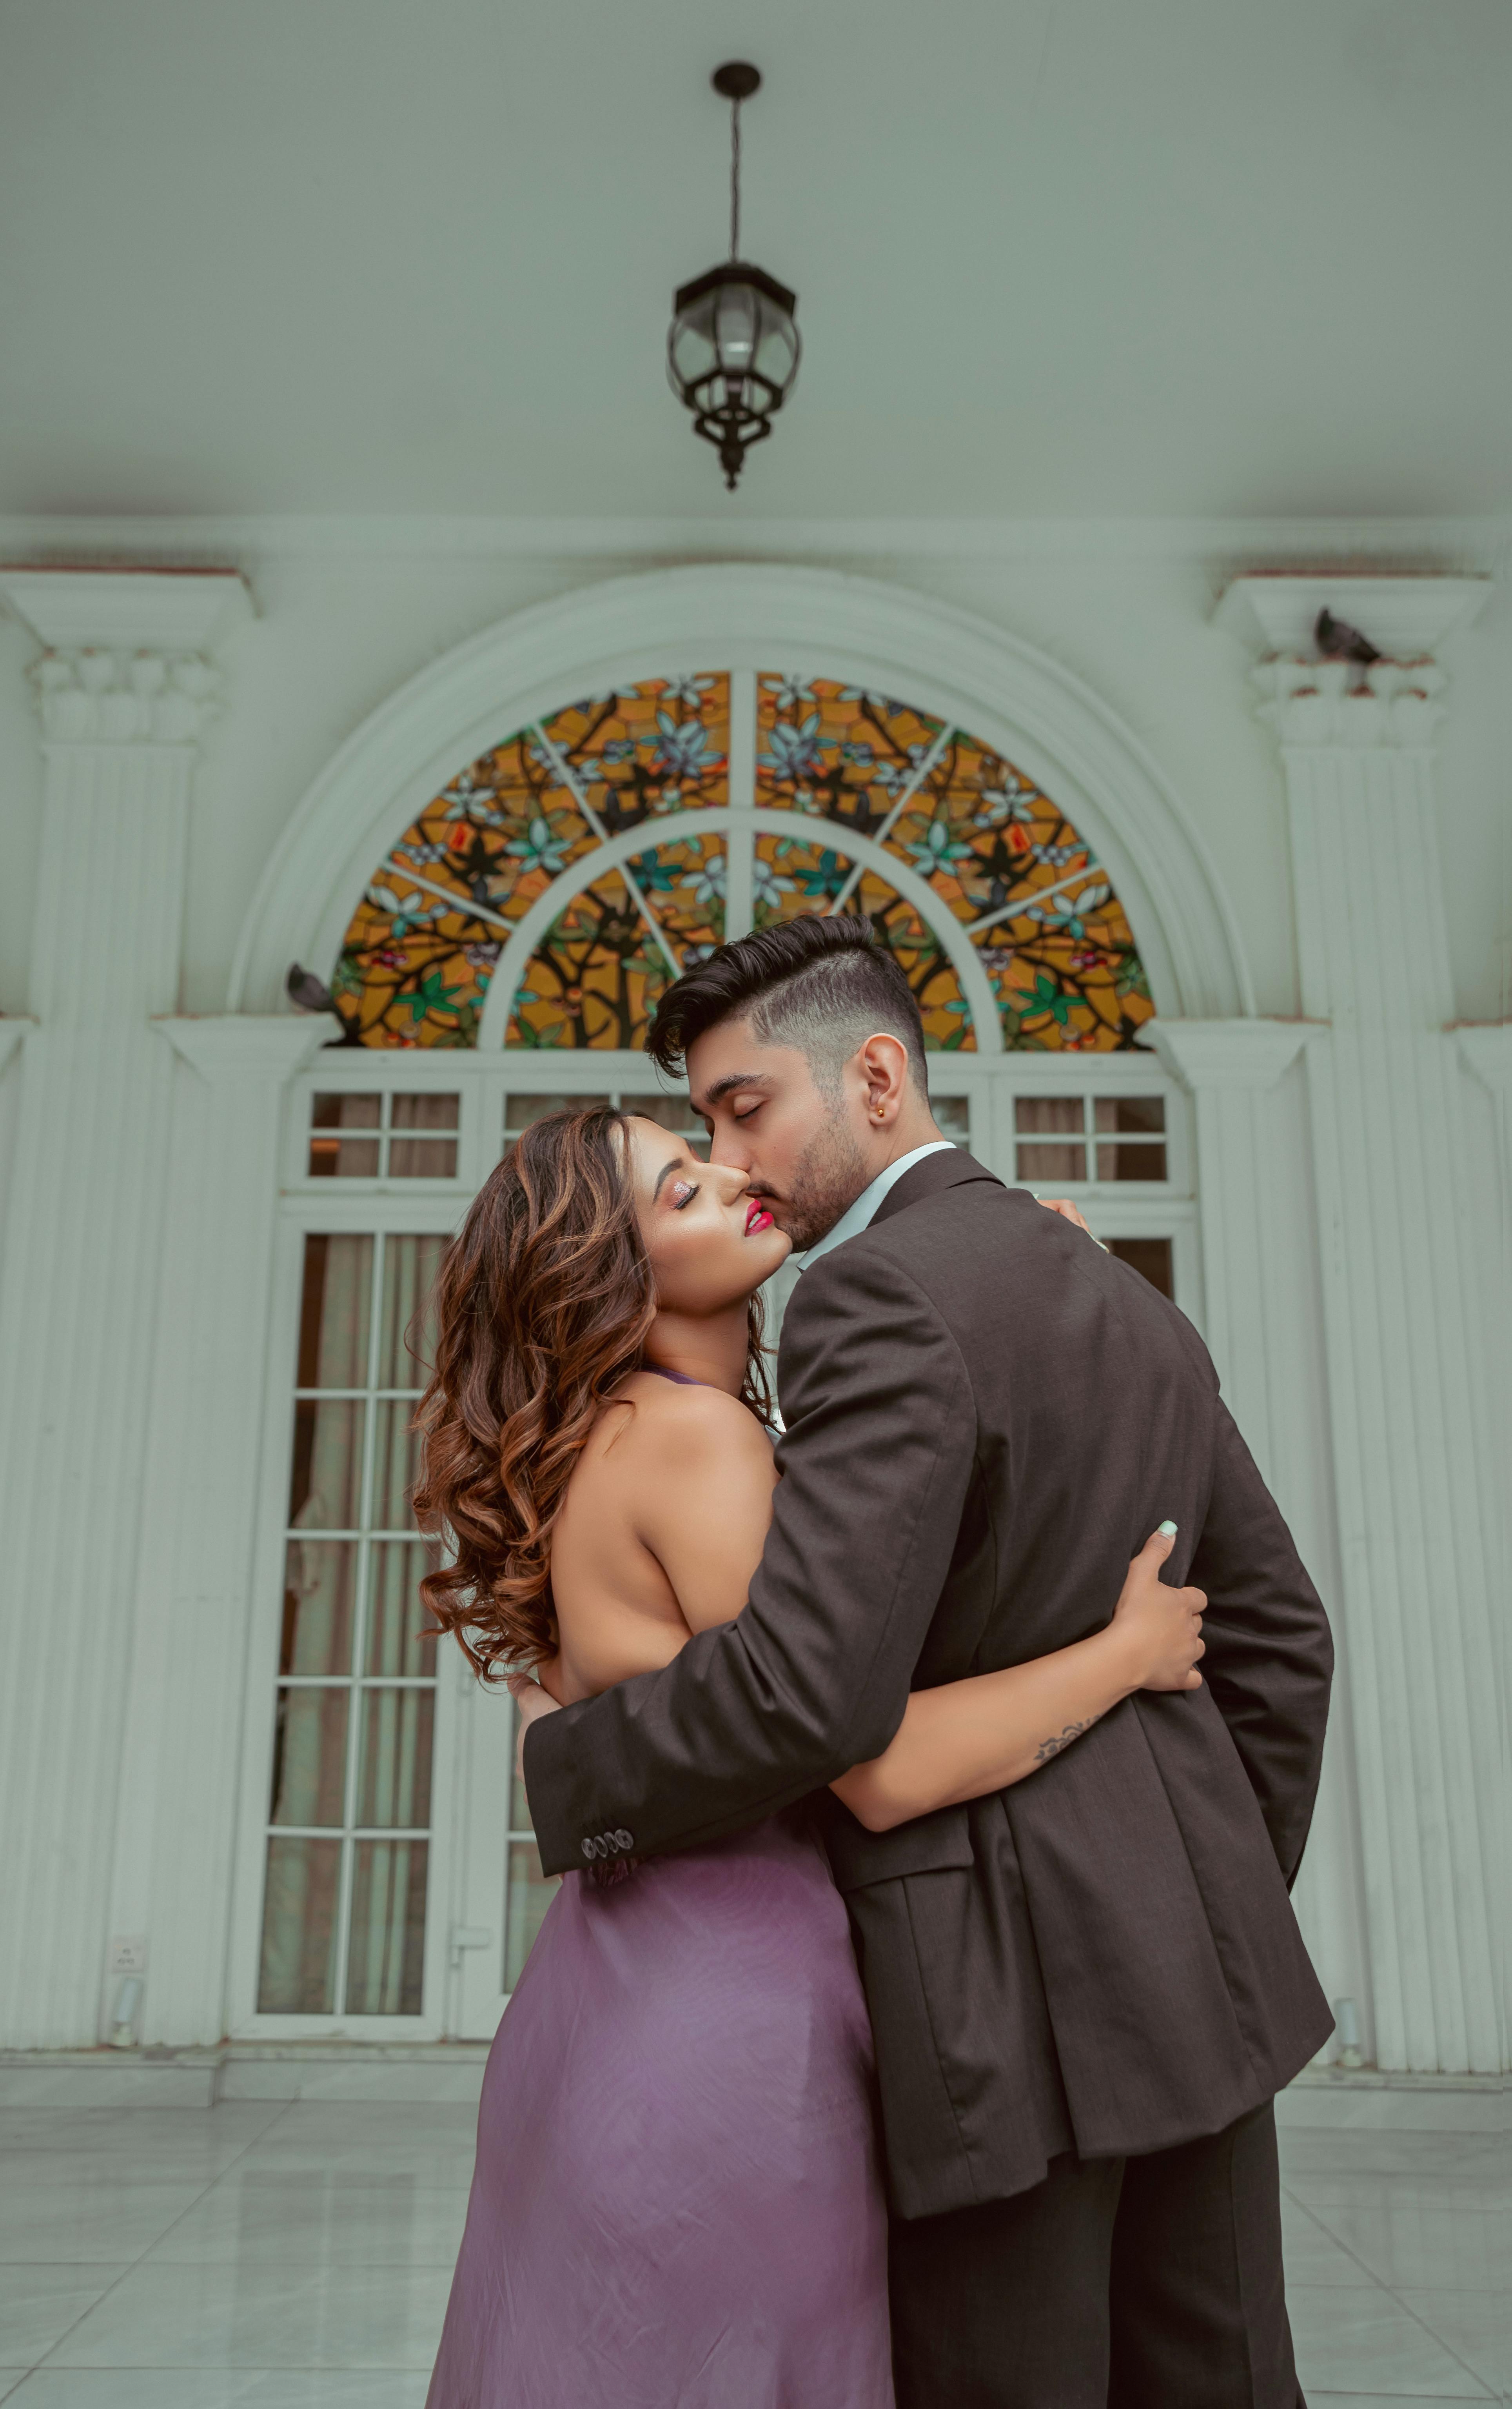 https://images.pexels.com/photos/15930855/pexels-photo-15930855/free-photo-of-photo-of-a-couple-kissing-and-cuddling-in-front-of-a-white-building.jpeg